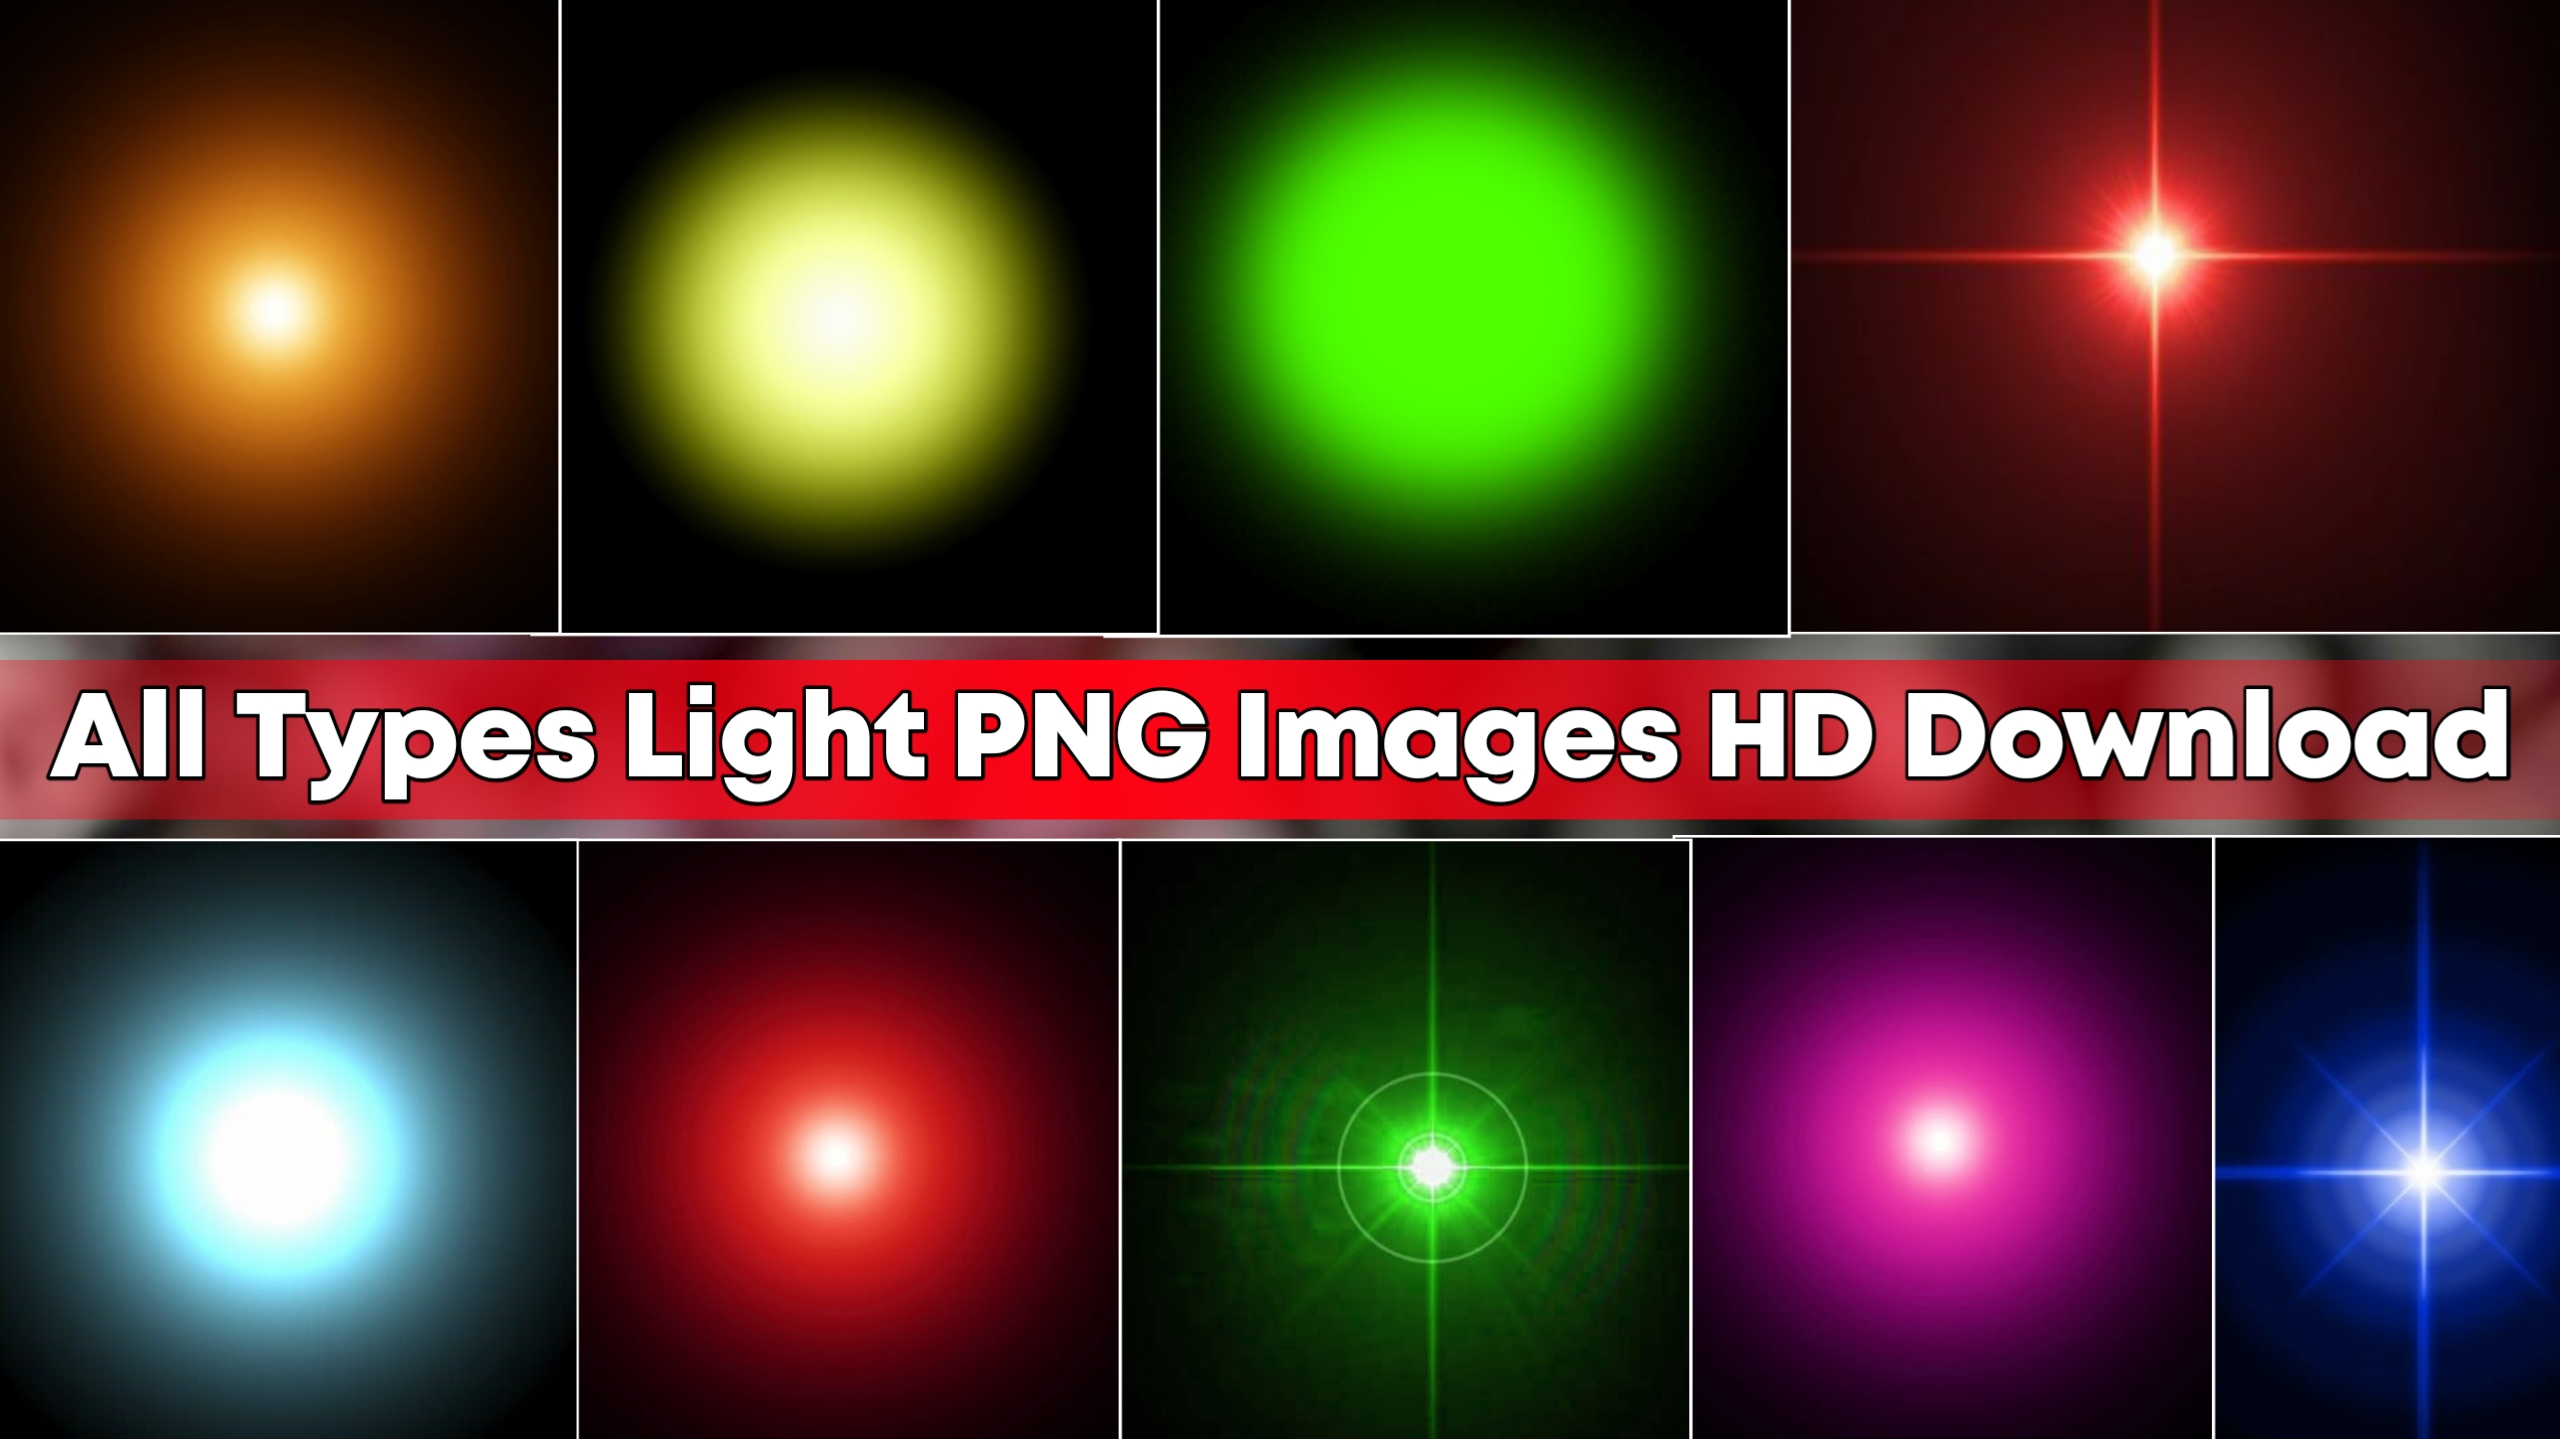 100+] Download Light Png [Absolutely Free] Picsart Photo Editing [Latest  Light Png Download]